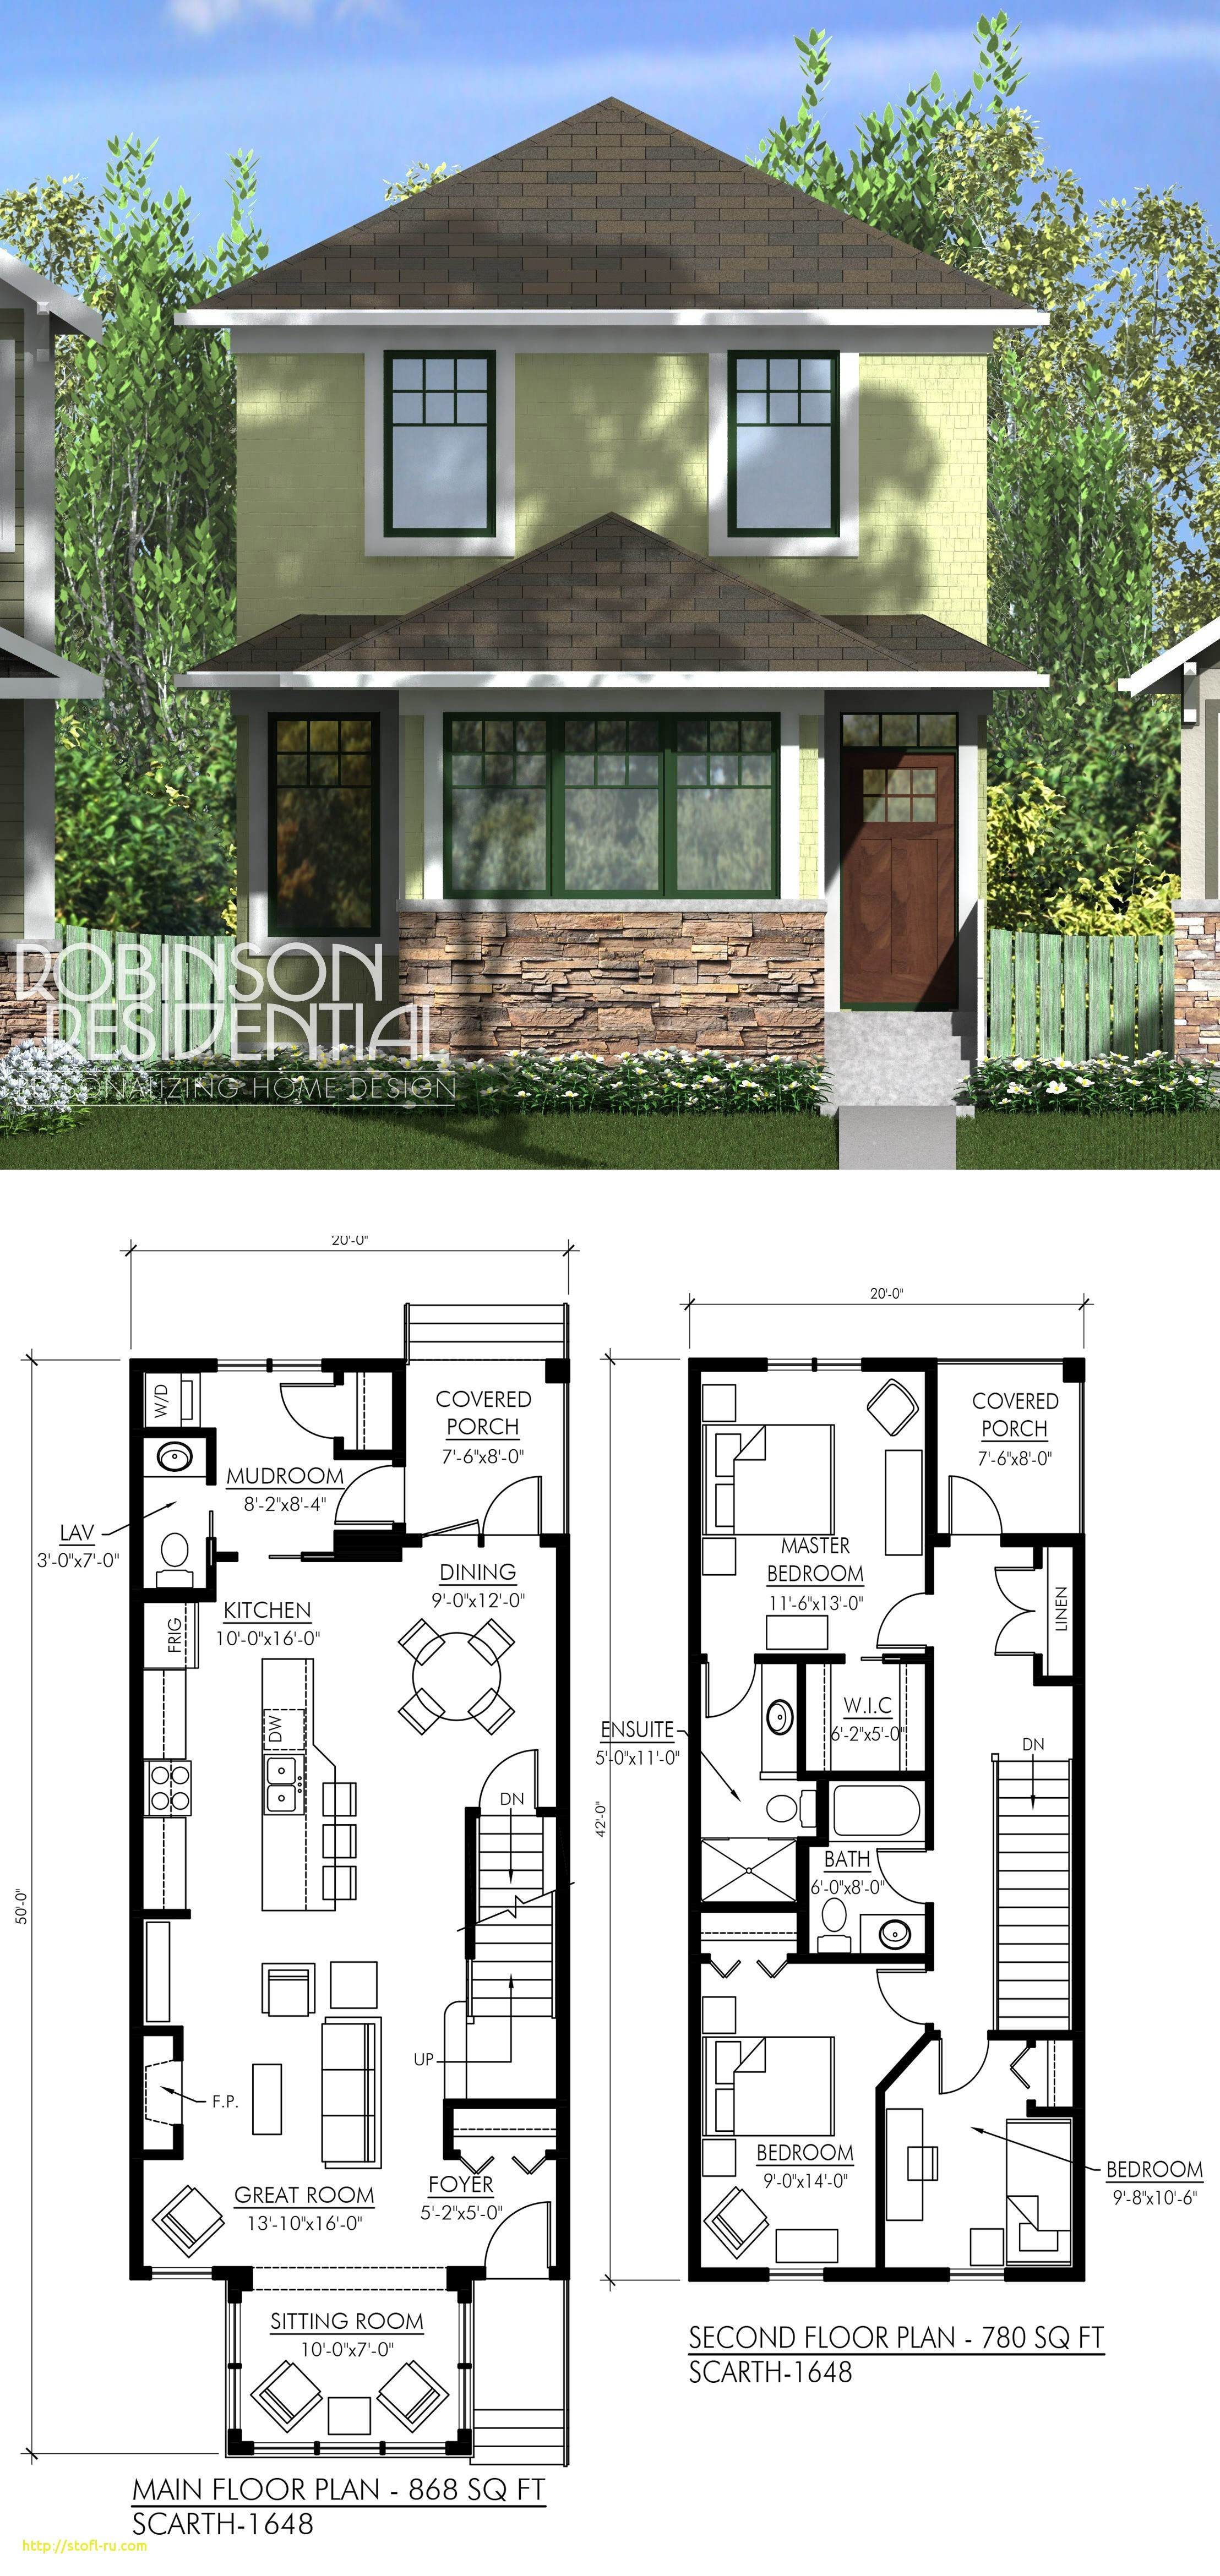 20 Fabulous Very Large Floor Vases 2024 free download very large floor vases of large floor plans new 9 beautiful floor vases qosy for tall vaseh in large floor plans best of craftsman style home plans single story modern style house design of